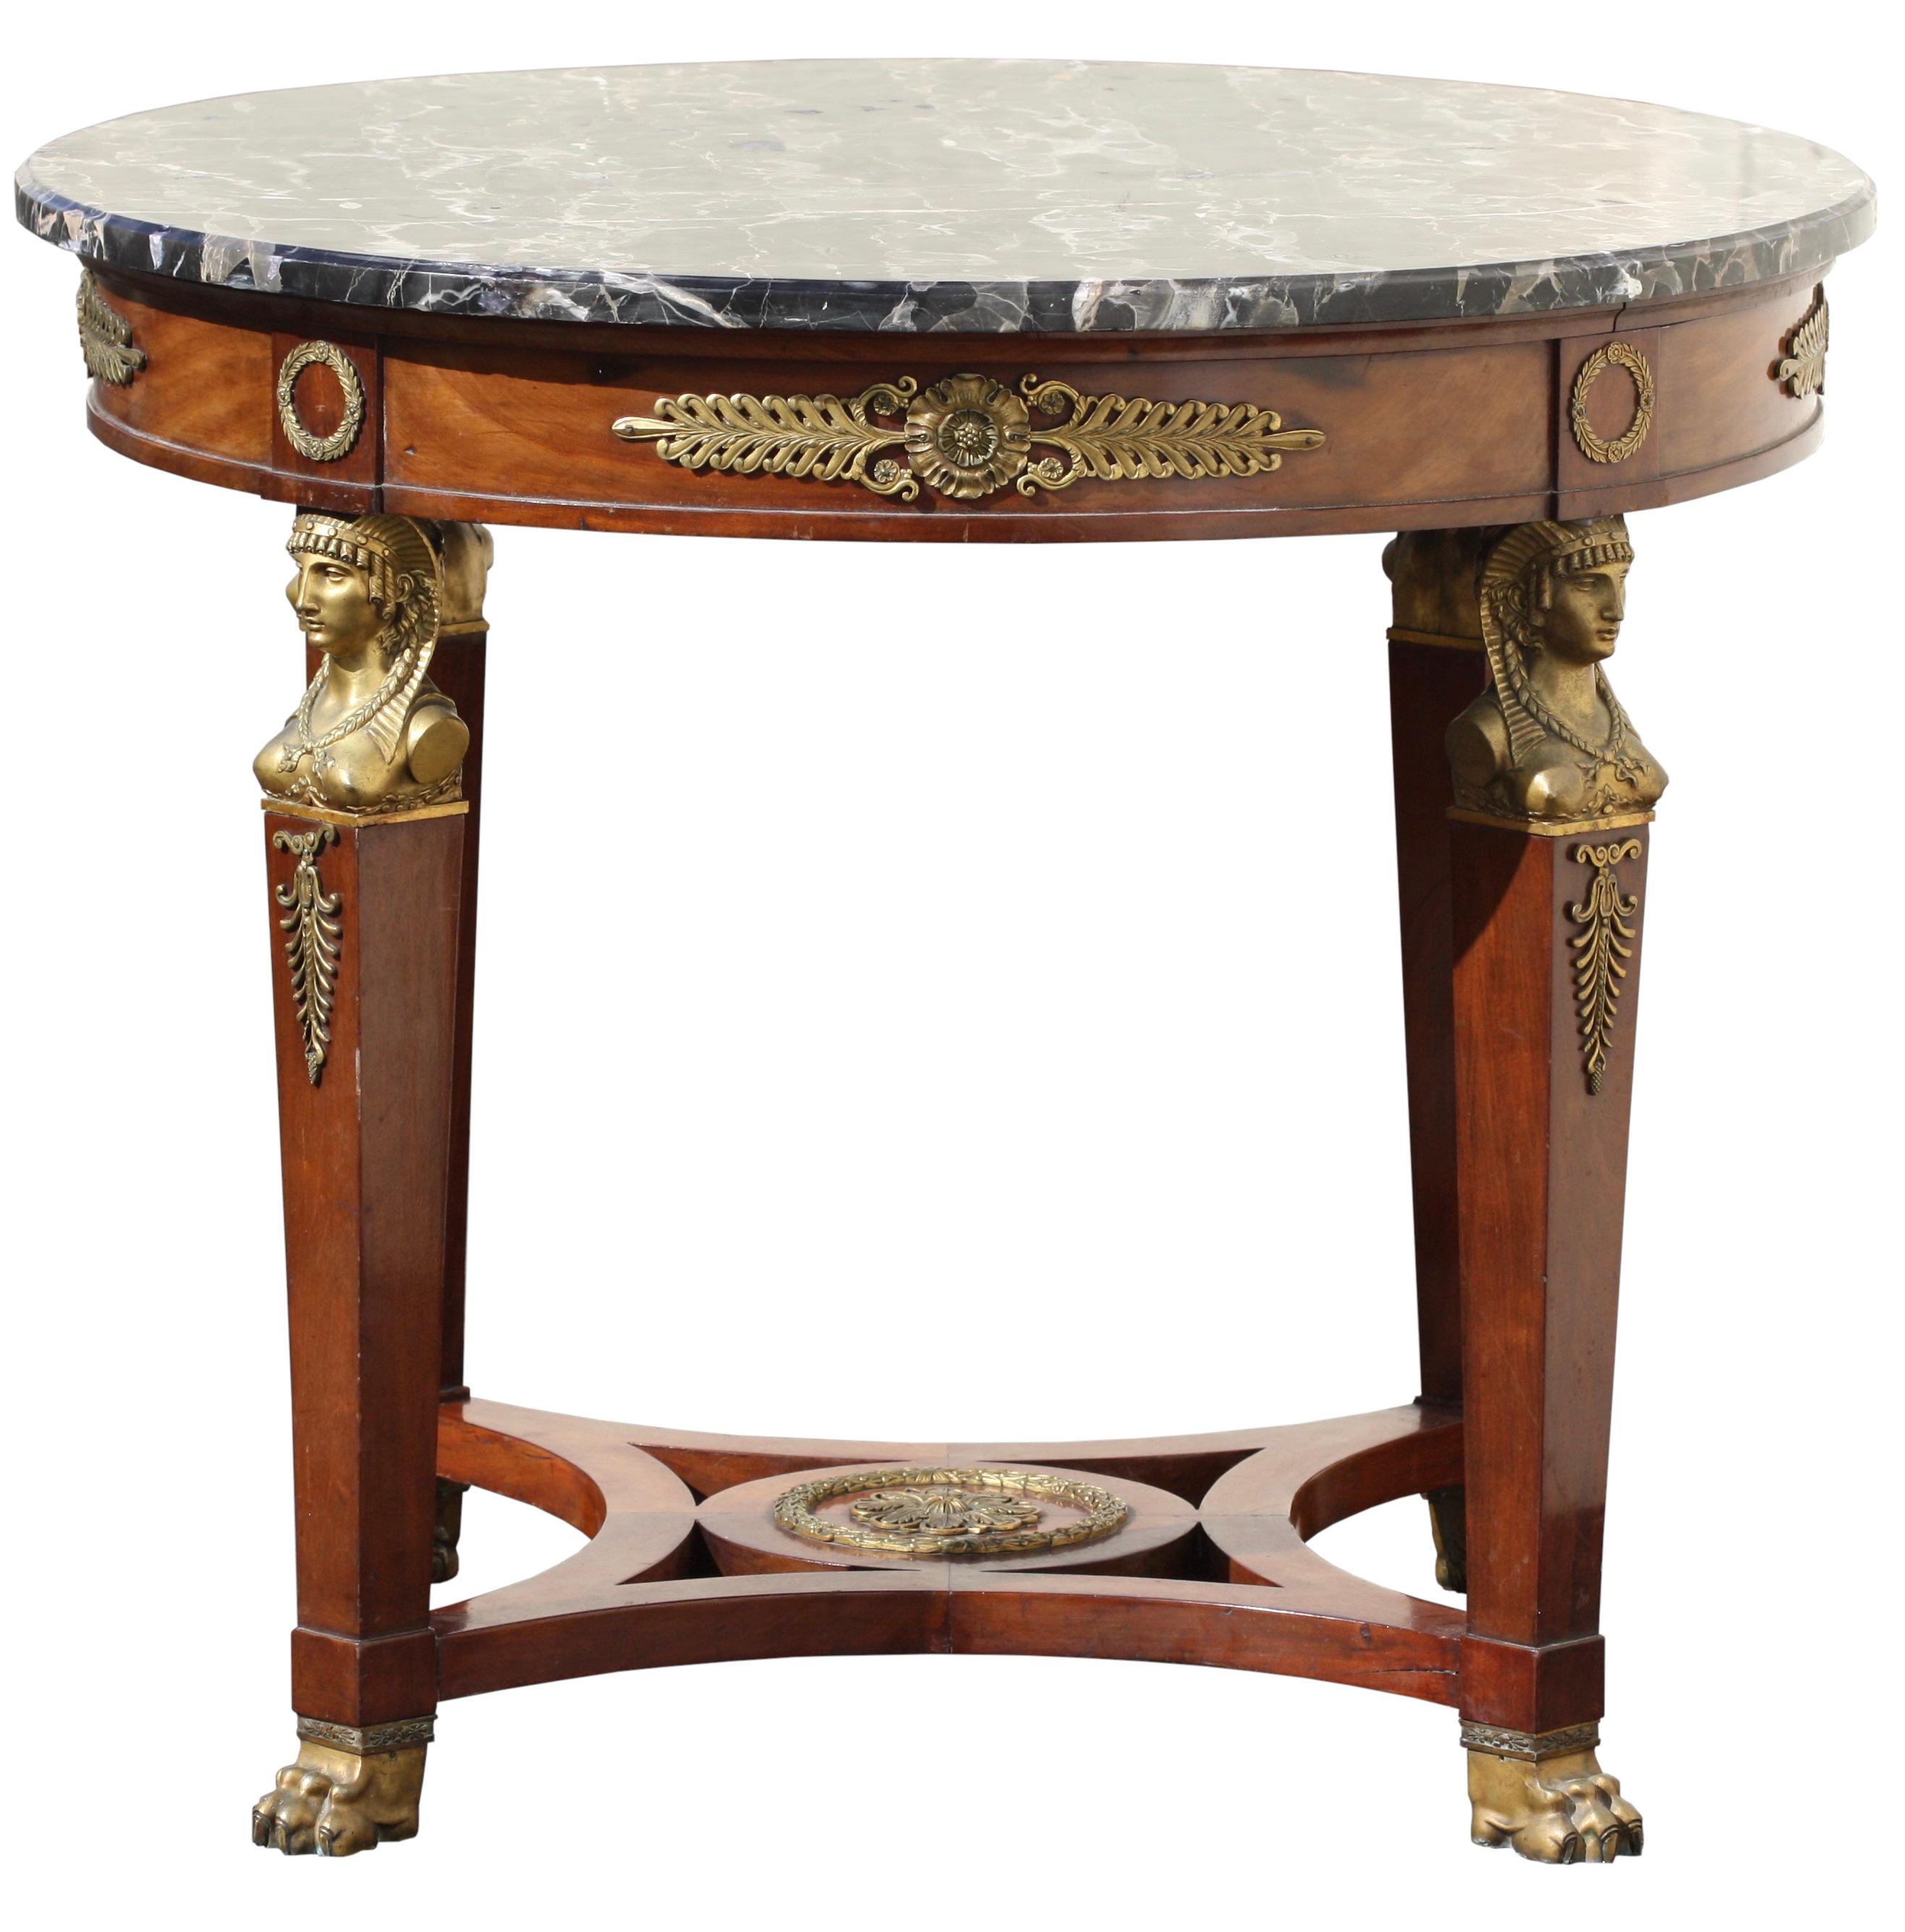 An Empire style ormolu-mounted mahogany marble top center table, late 19th century.
The circular portoro marble top above a frieze applied with anthemia, rosettes and laurel wreaths, raised square tapered legs each headed by a female Egyptian bust,